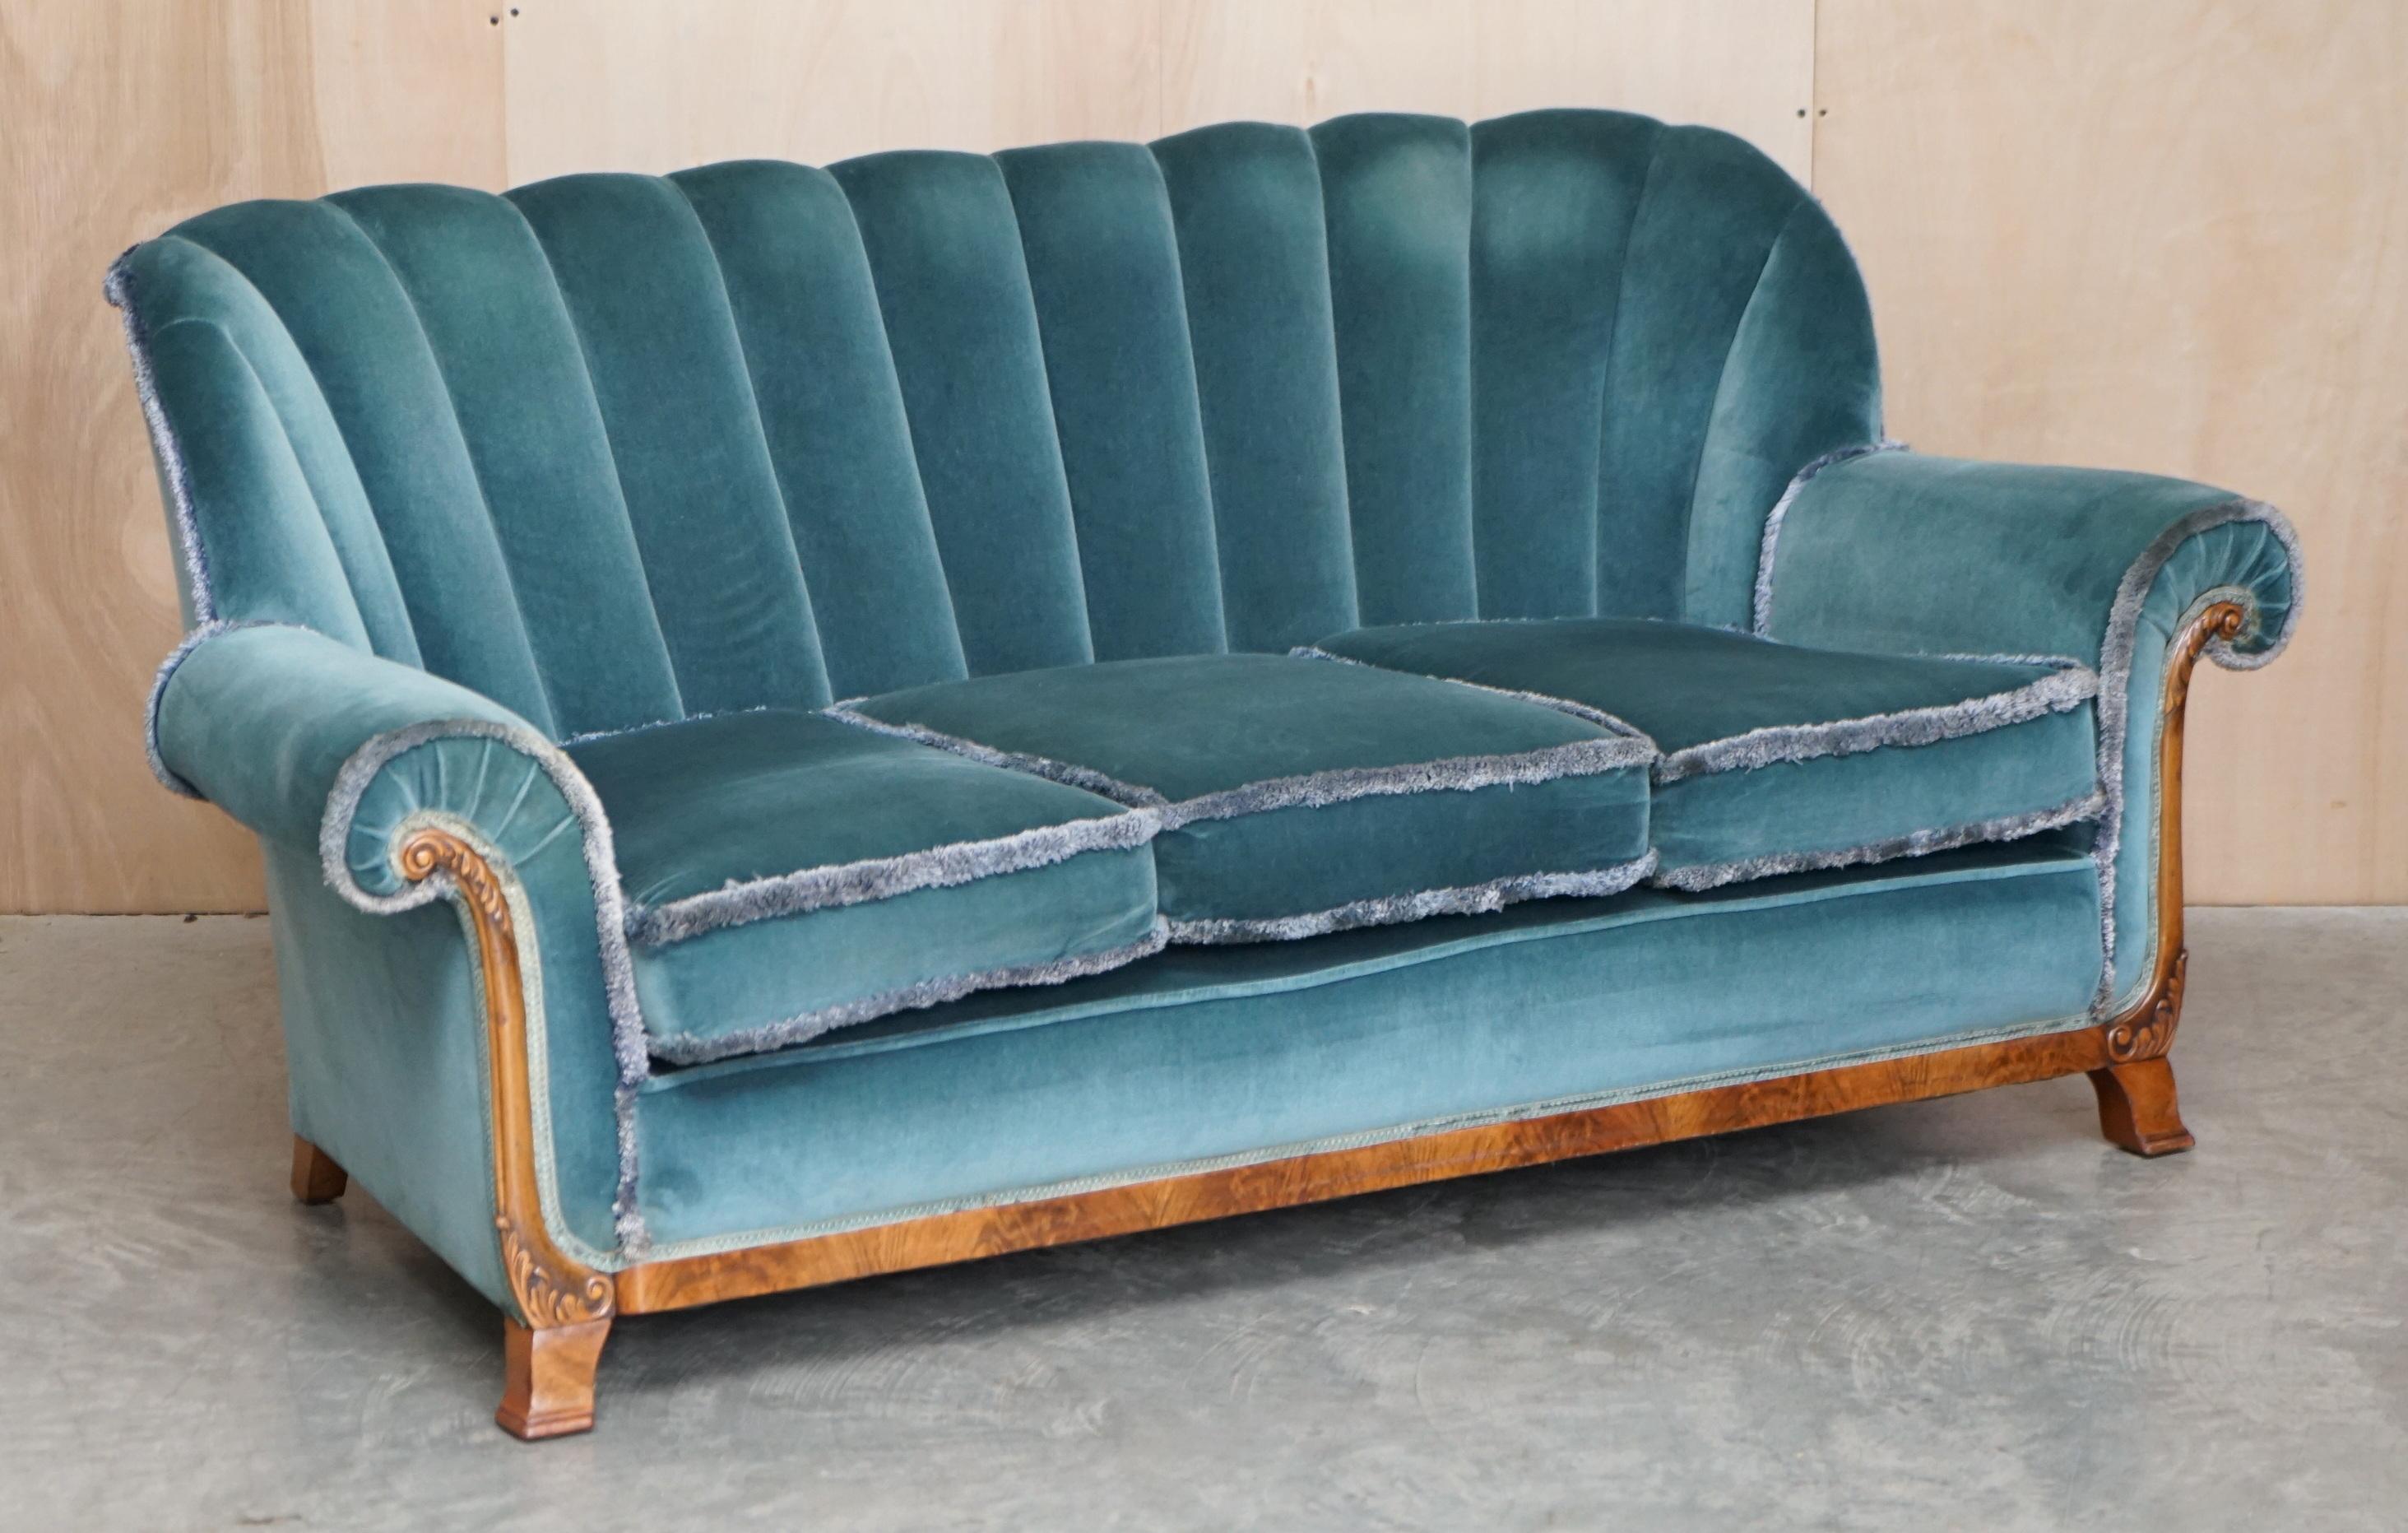 We are delighted to offer this exquisite circa 1920’s Art Deco Fluted back Walnut framed three piece suite with teal blue velour upholstery

A very good looking and well made suite, I purchased this with a view to reupholstering it in either